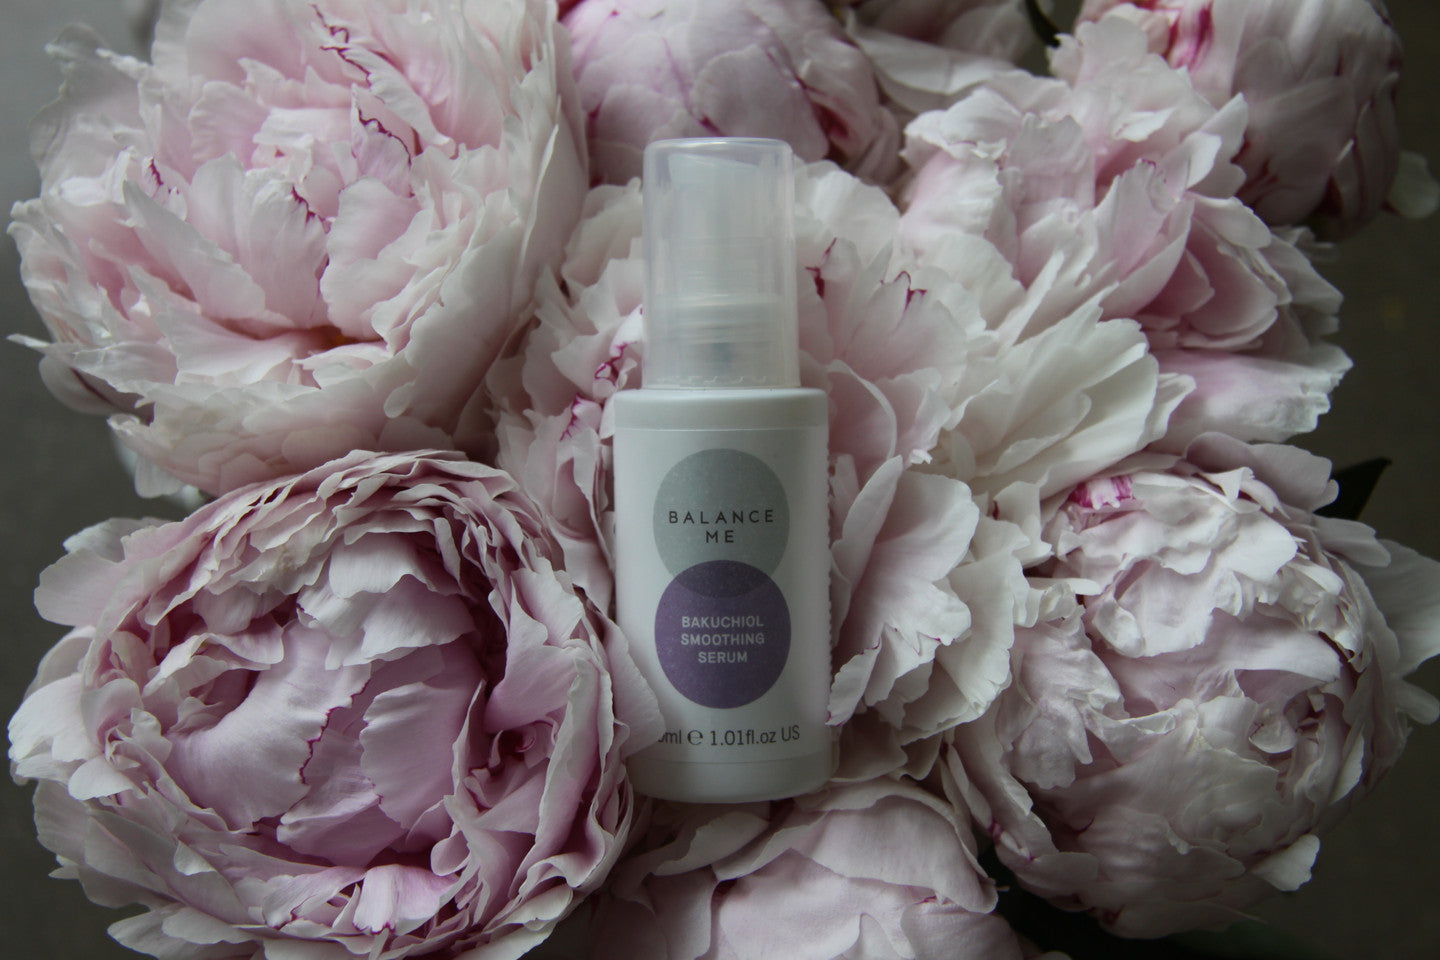 Introducing our new Bakuchiol Smoothing Serum